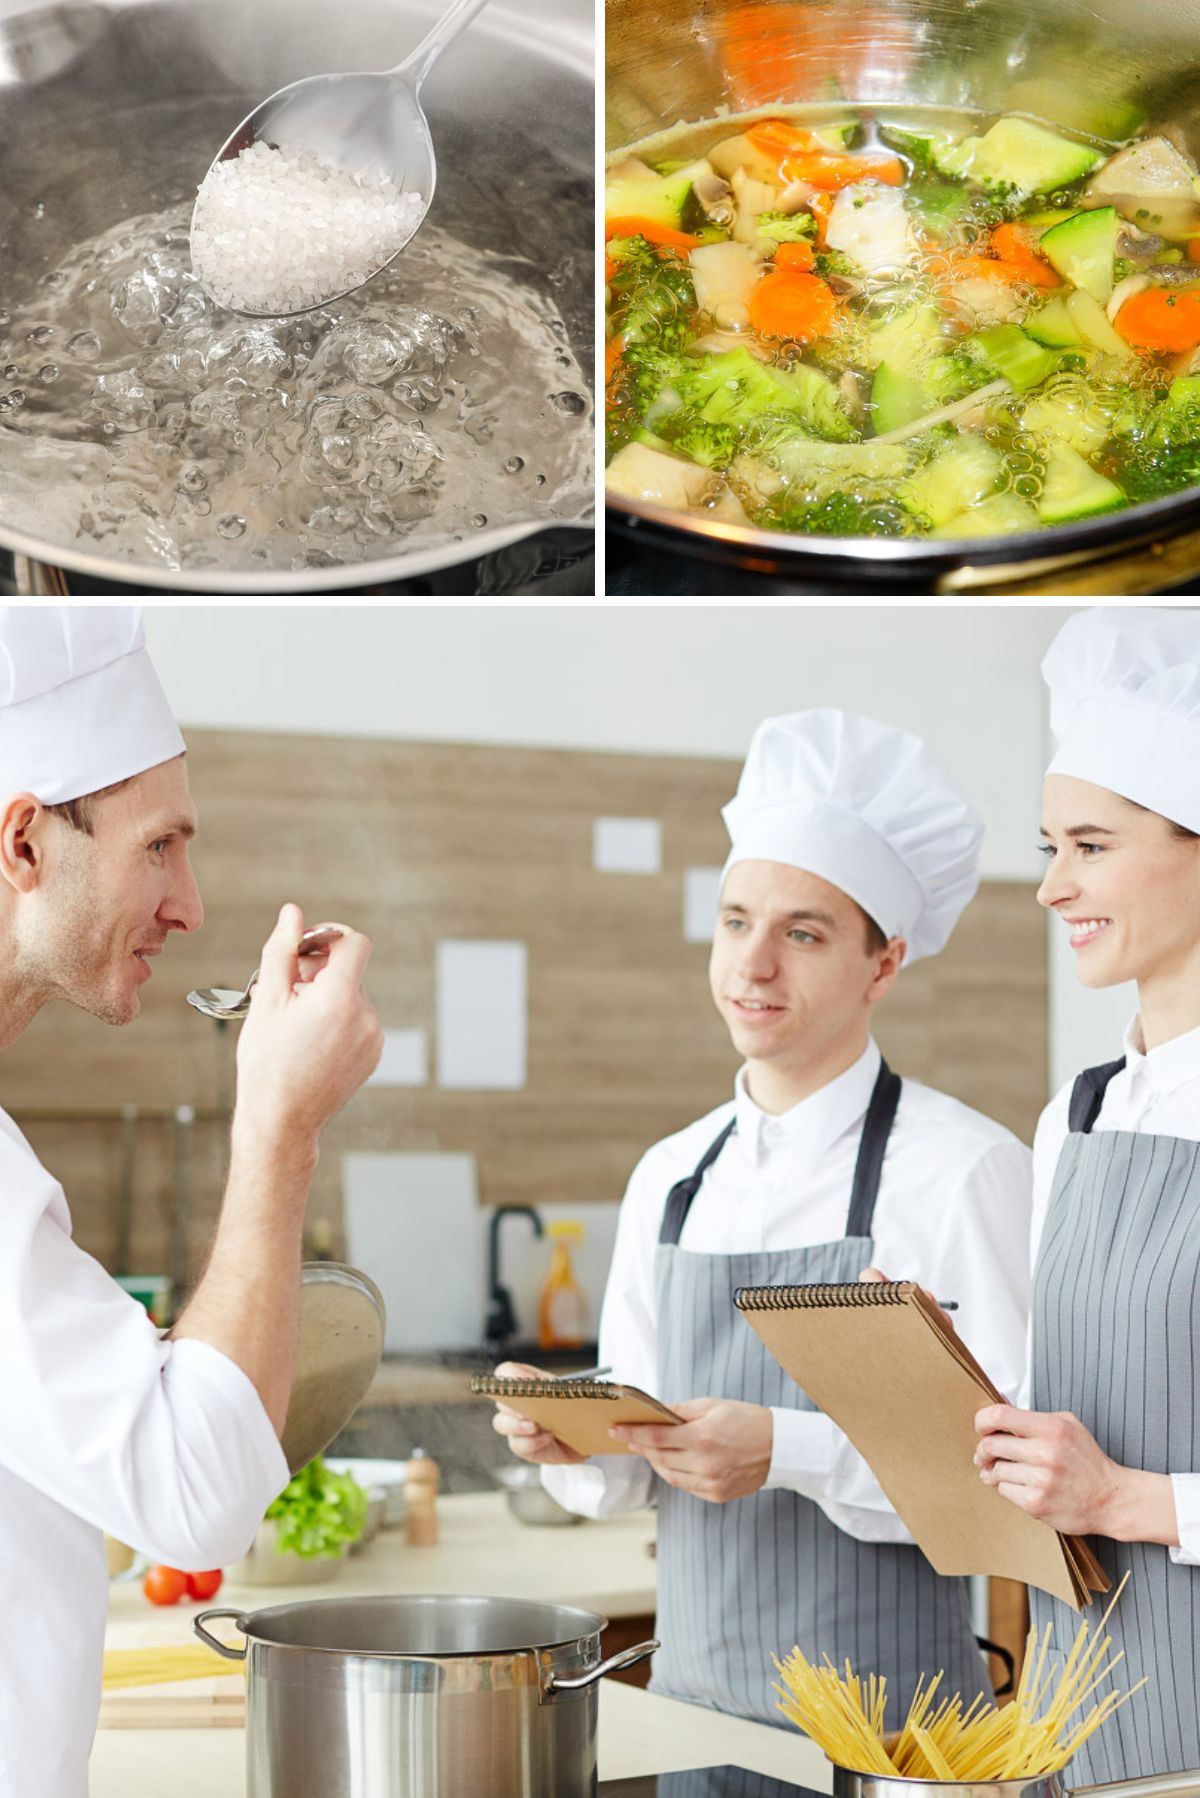 Three photos: top left - salt on a spoon above boiling water. Top right - vegetables in boiling water. Bottom - A chef tasting water that has been salted with two students looking on